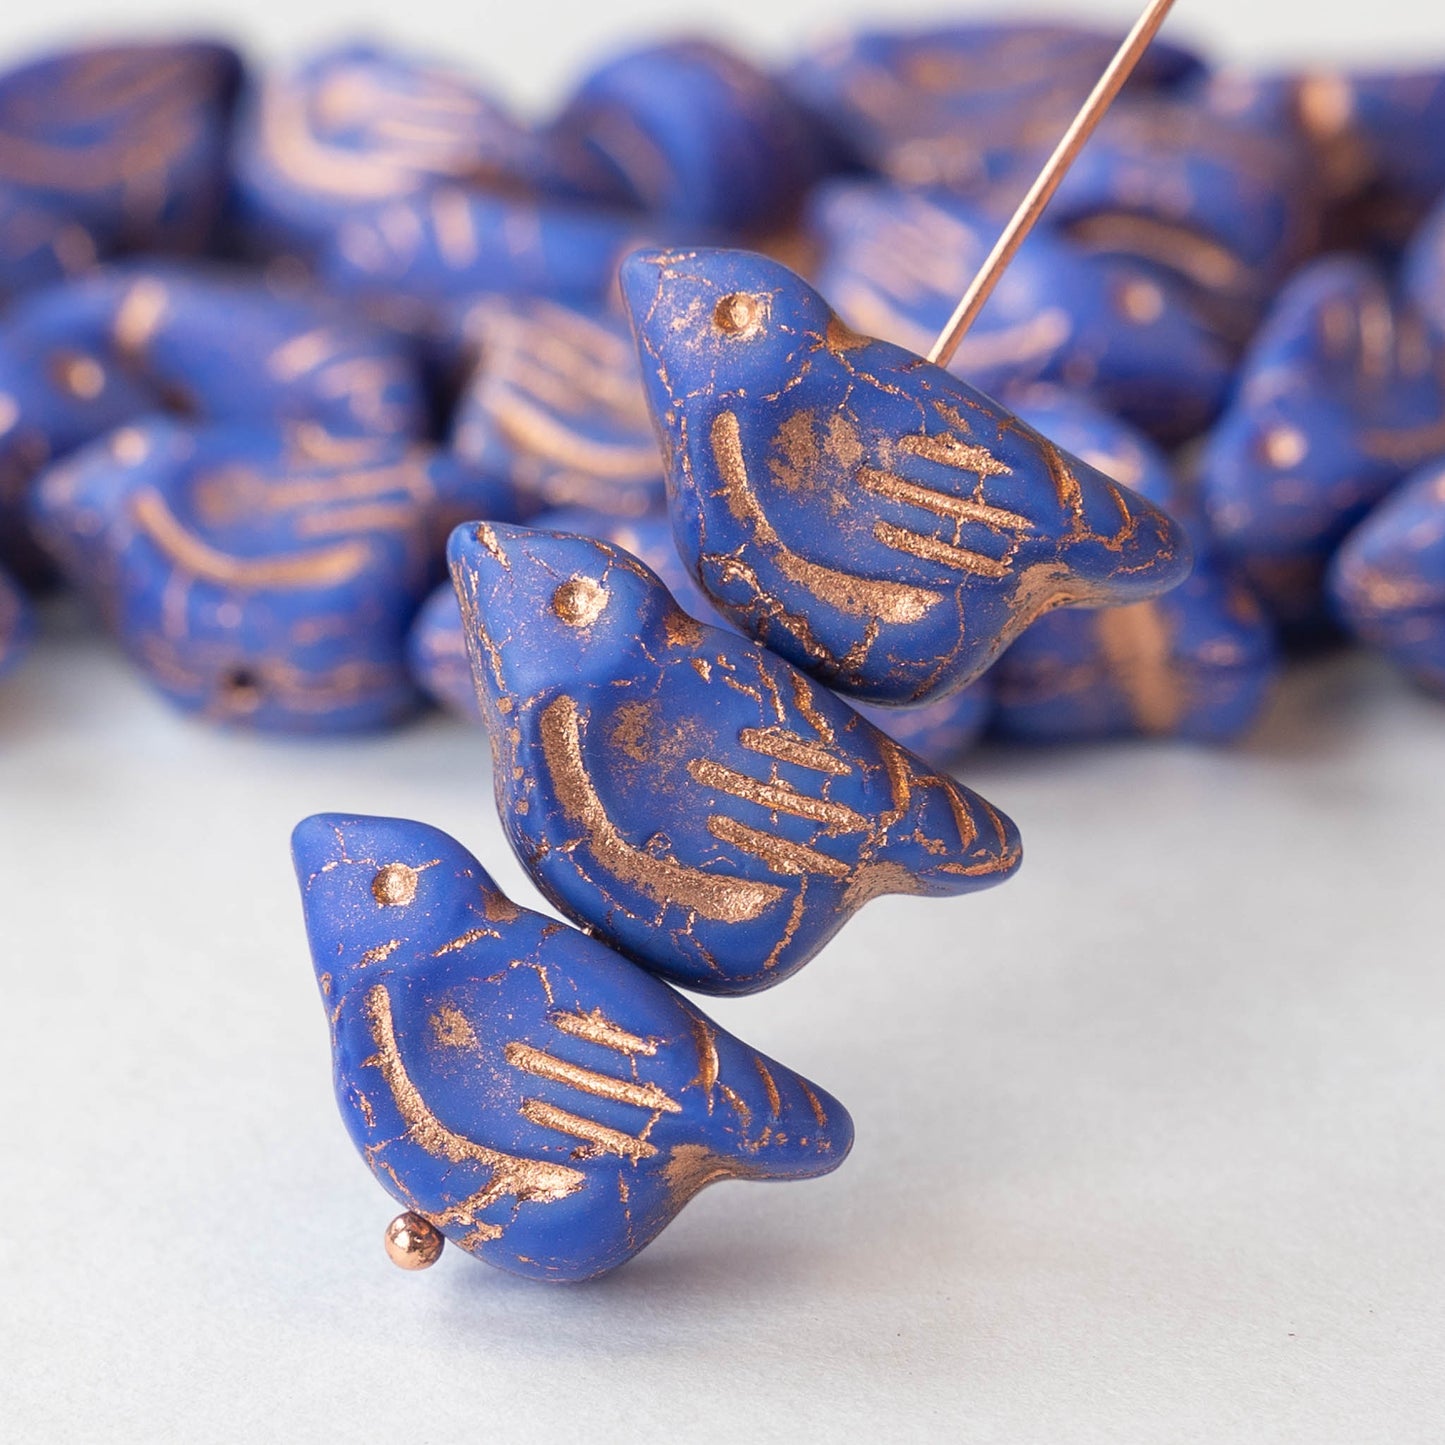 Bird Beads -  Blue with Copper Wash - 2 or 6 Birds